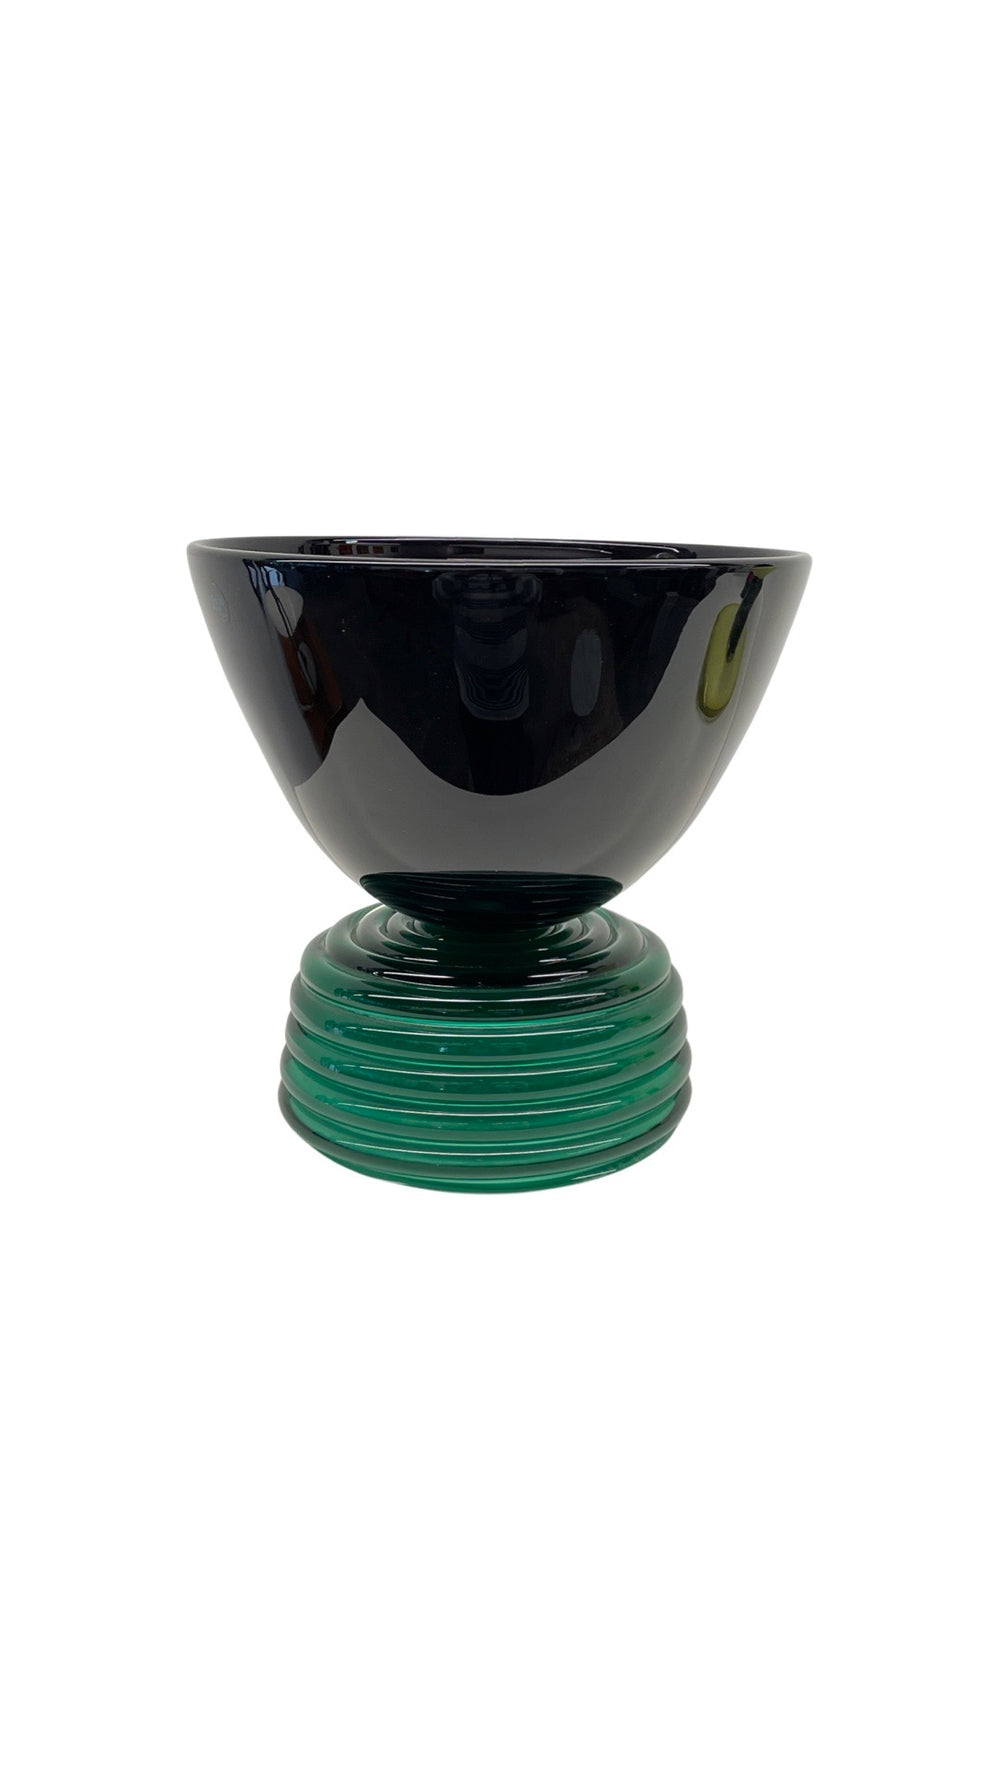 Peter Shire limited edition signed and dated glass sculpture / vase for Vistosi, Italy, Pedestal, USA / Italy, 1990